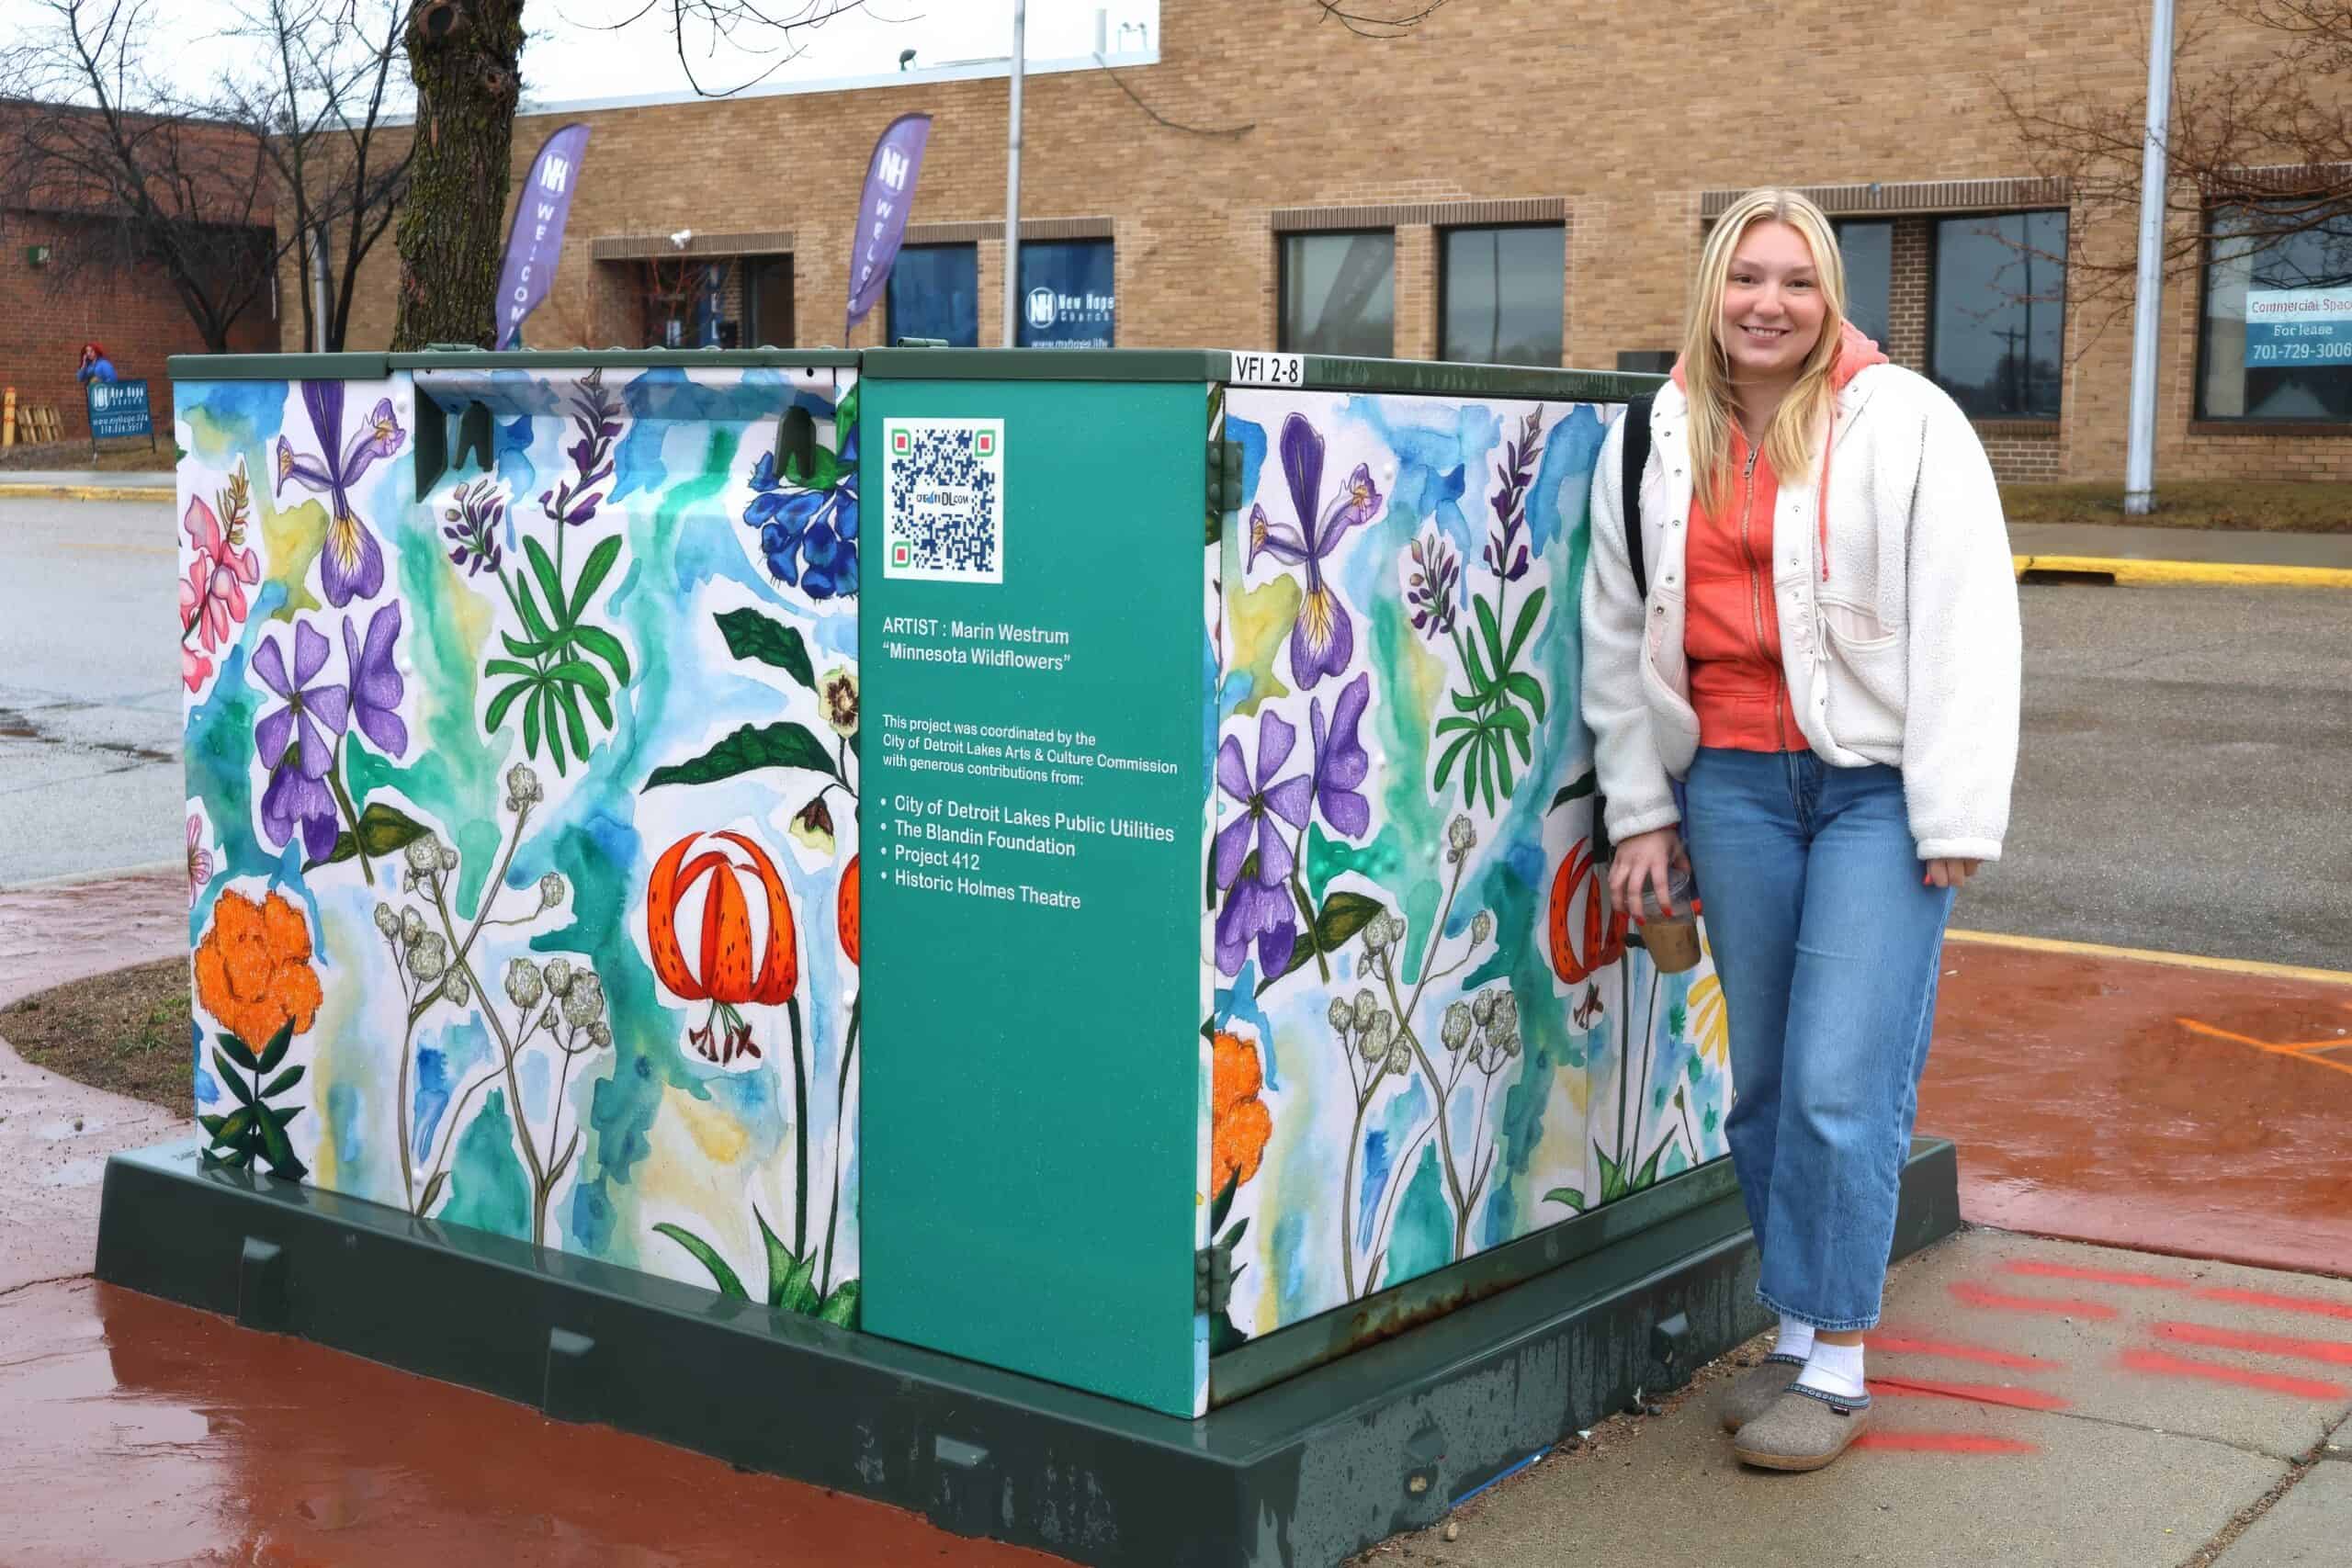 "Minnesota Wildflowers" power box art wrap • Artist: Marin Westrum, standing next to the art • Power box created in coordination with Arts & Culture Commission and the City of Detroit Lakes Public Utilities